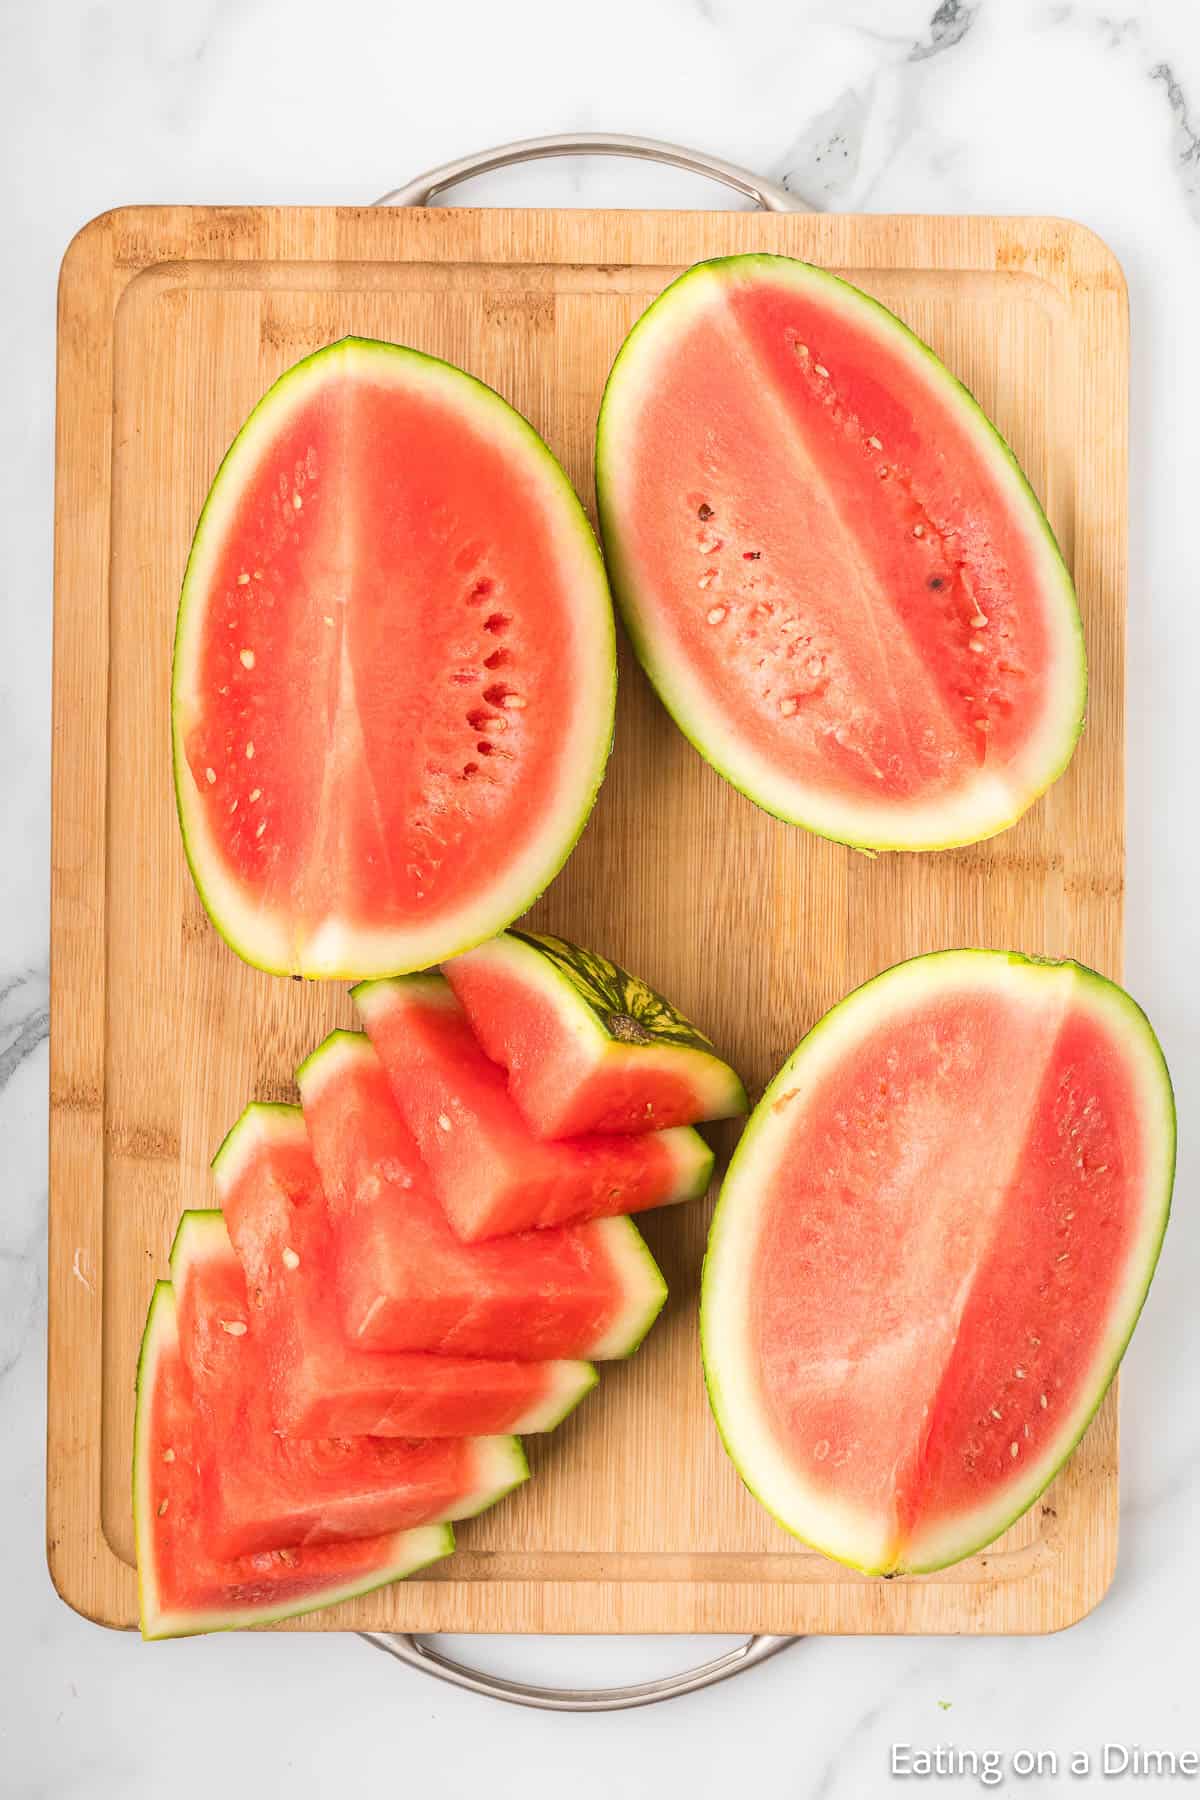 Watermelon cut into halves and then in a triangle shape